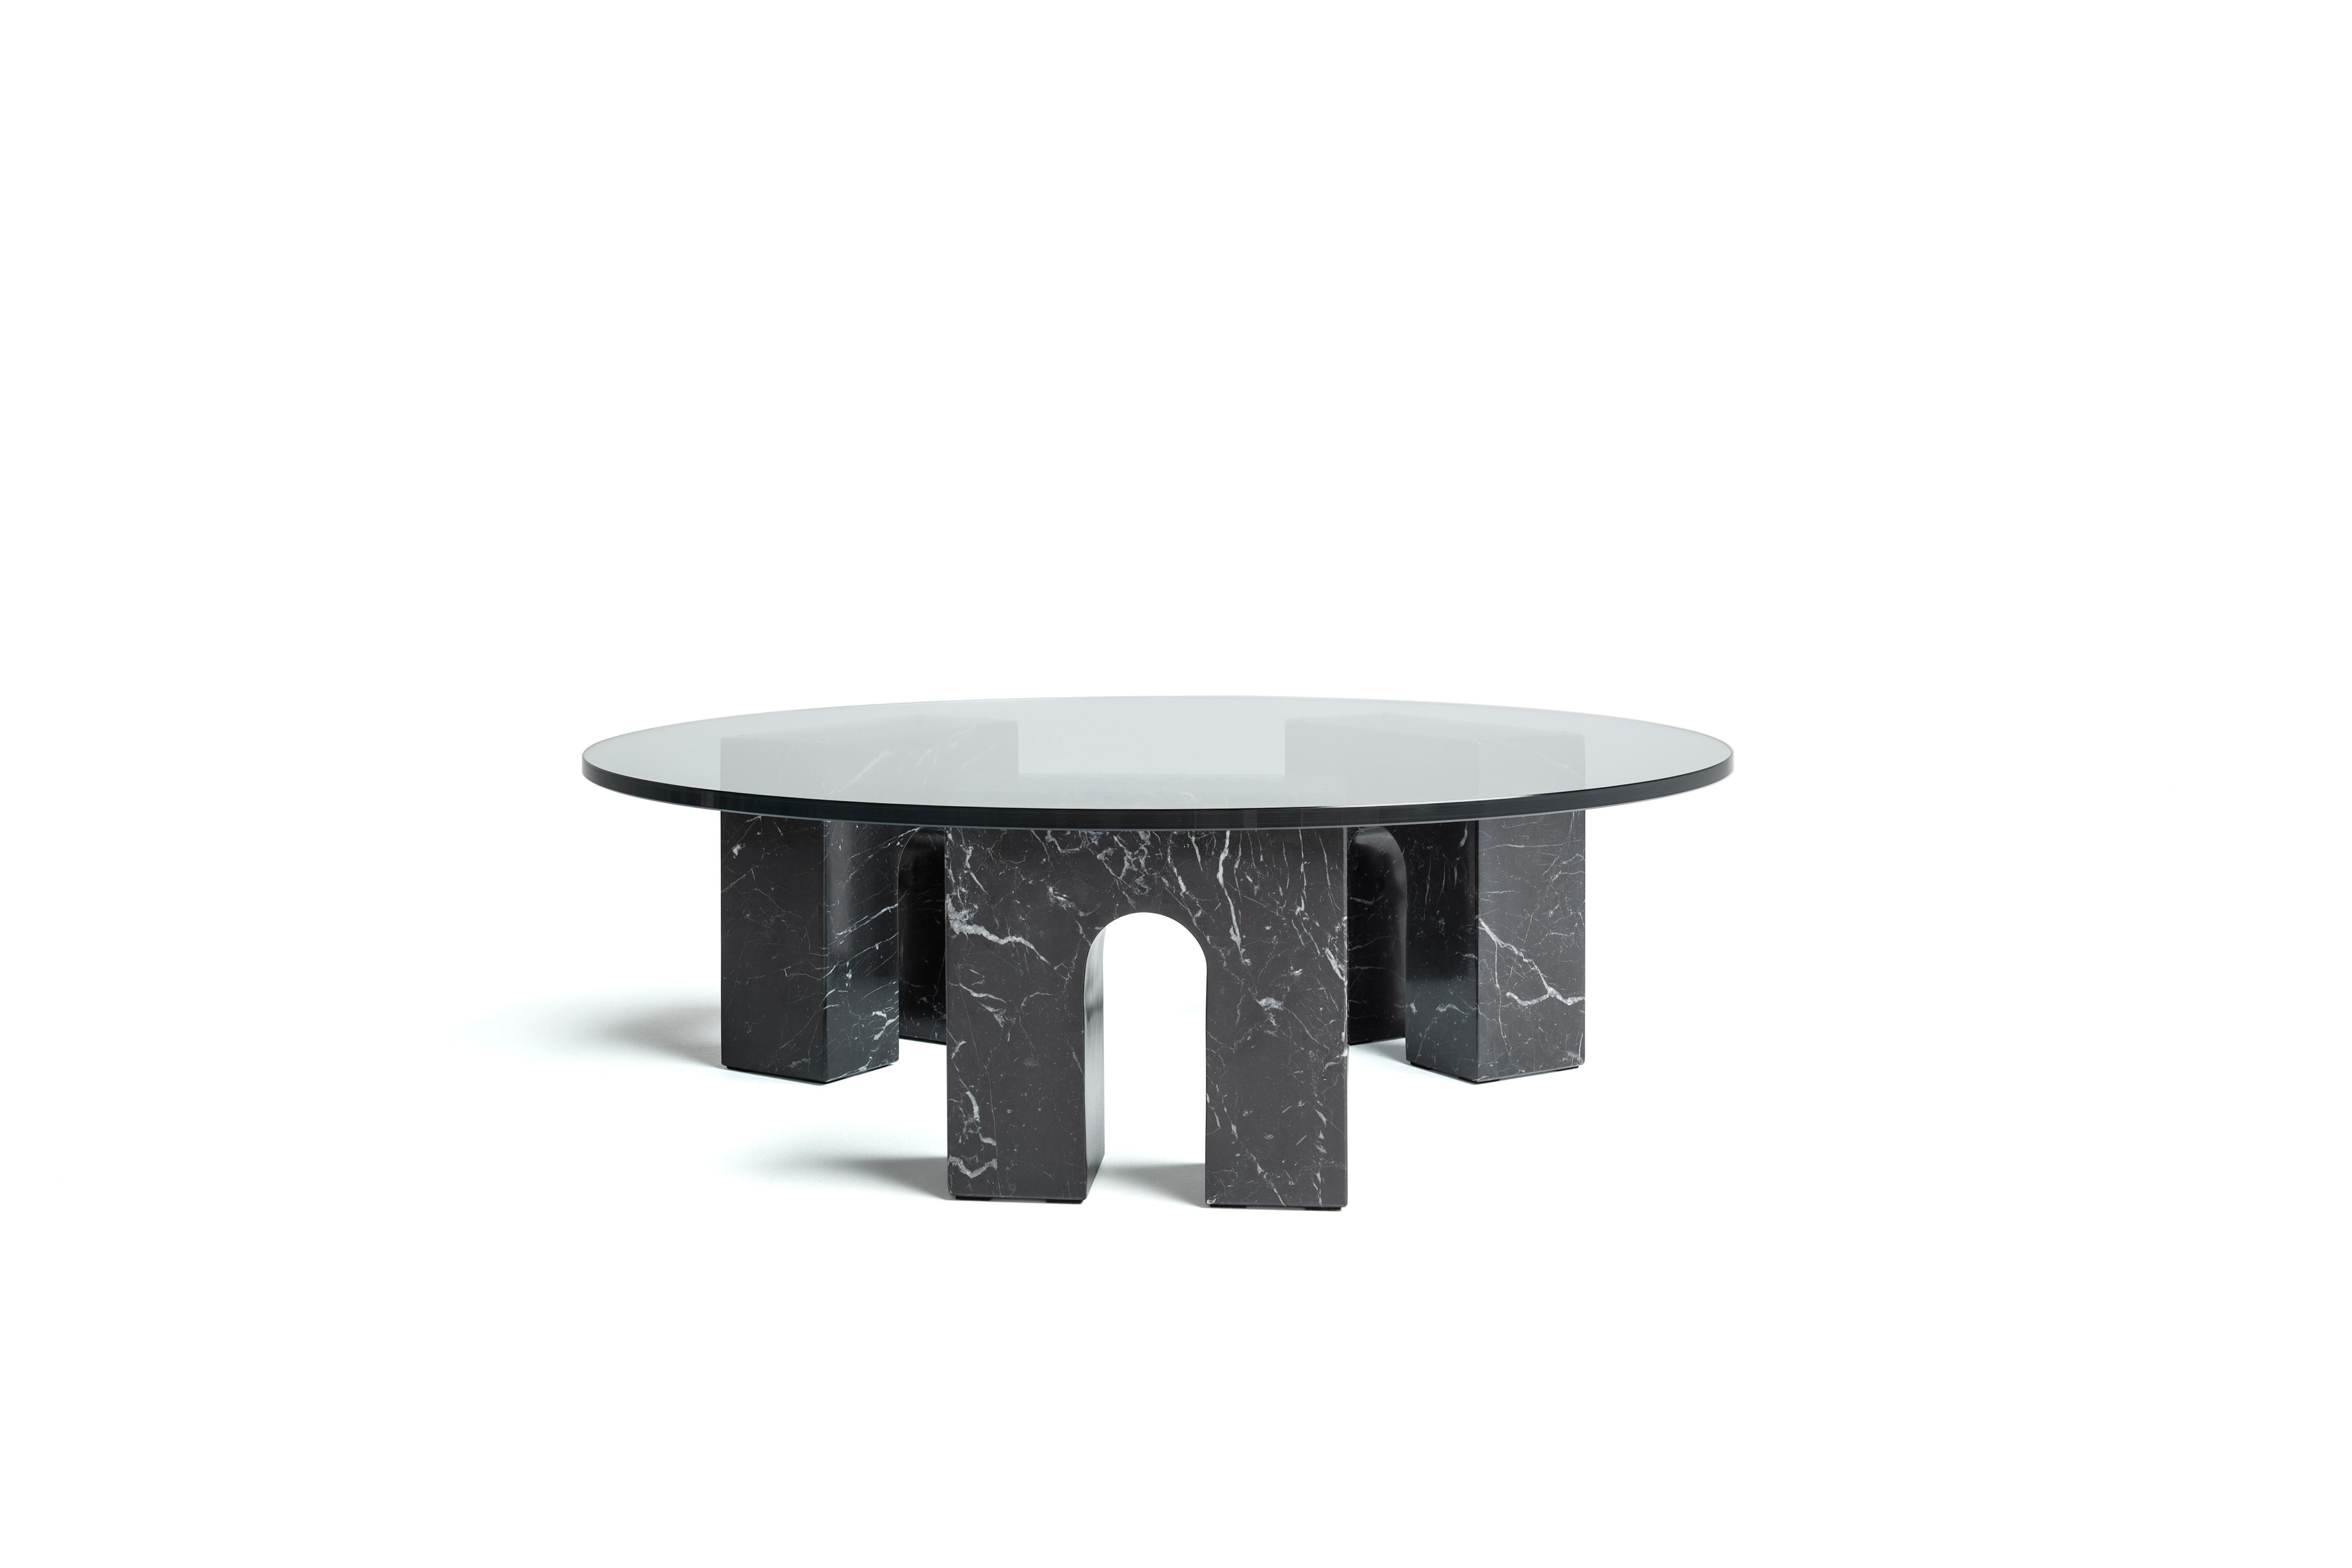 Triumph Marquina marble table by Joseph Vila Capdevila
Materials: Marquina marble, tempered glass
Dimensions: ø 94 x 29.5 cm
Weight: 21 kg

Luxurious mirror in two separated parts: the base, made with premium Carrara marble, and mirror, that can be